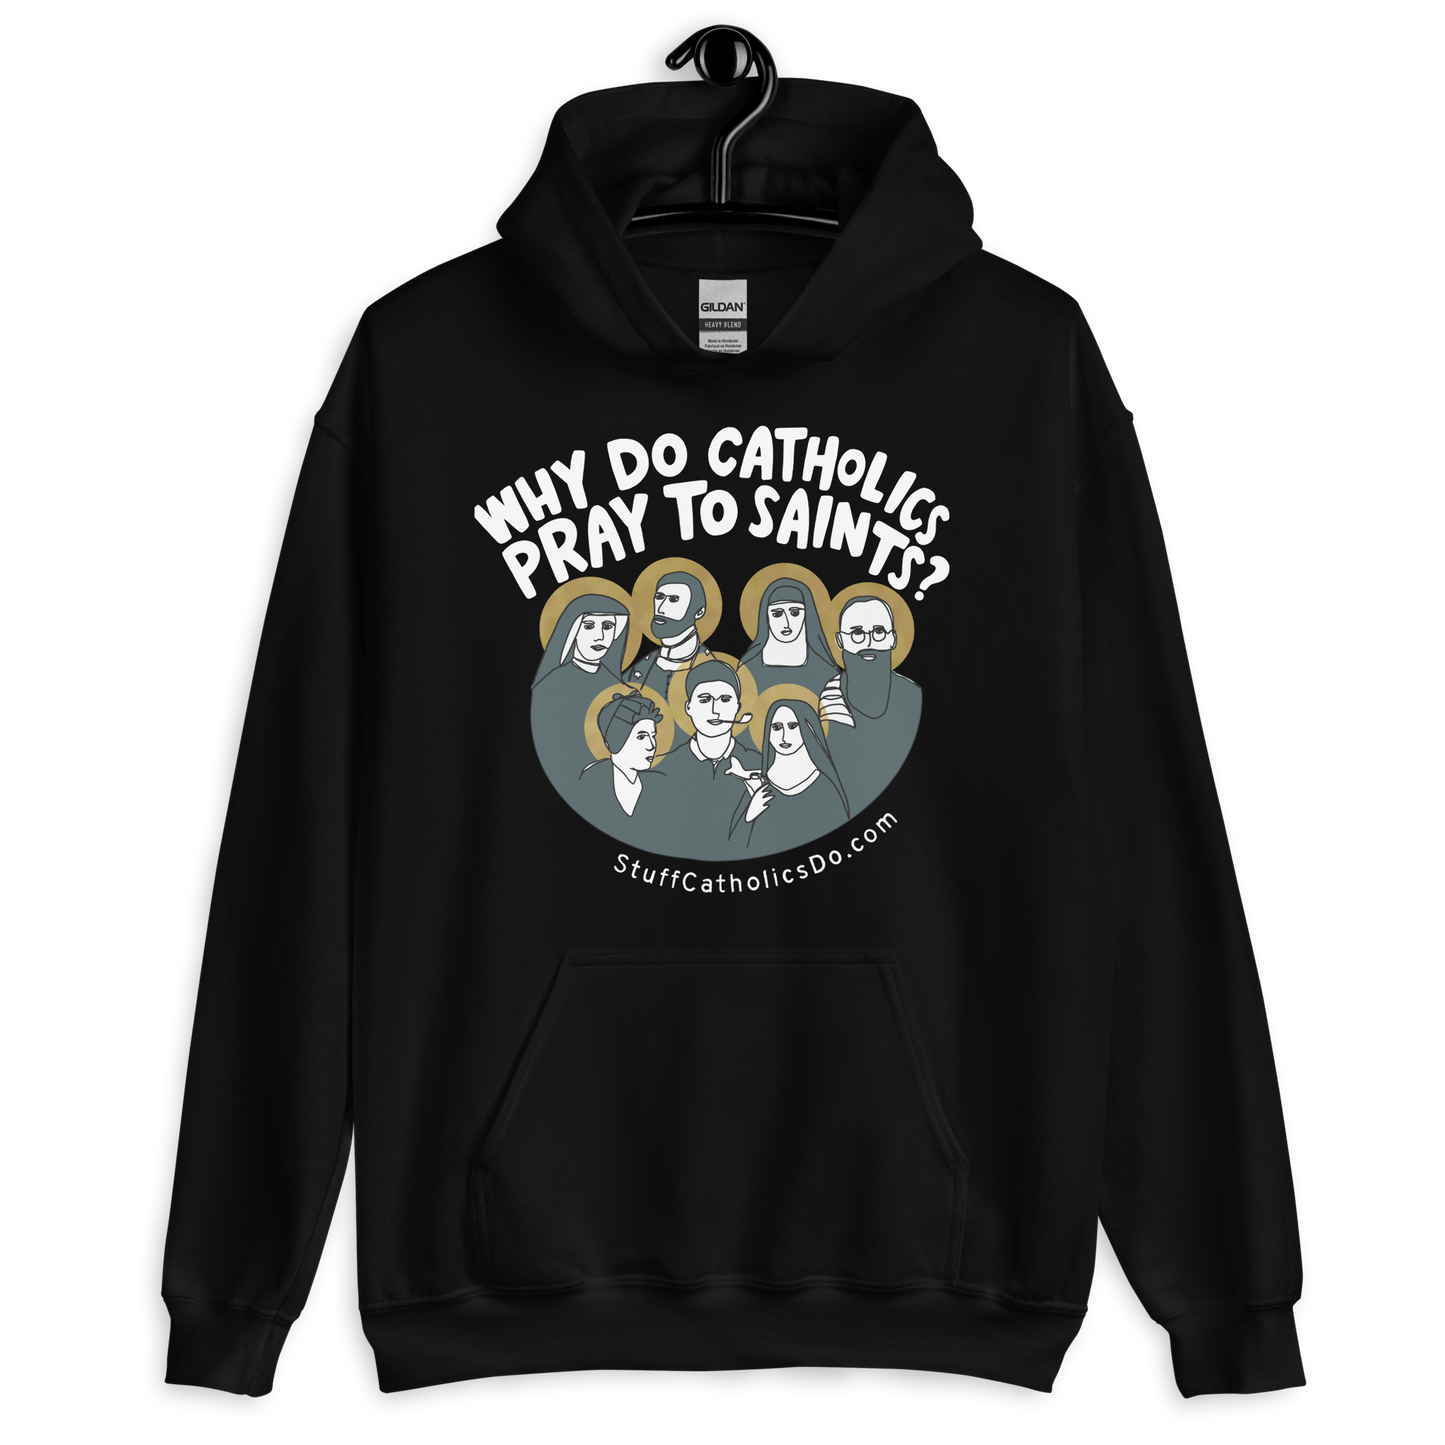 "Why Do Catholics Pray To Saints?" Hoodie - Front and Back